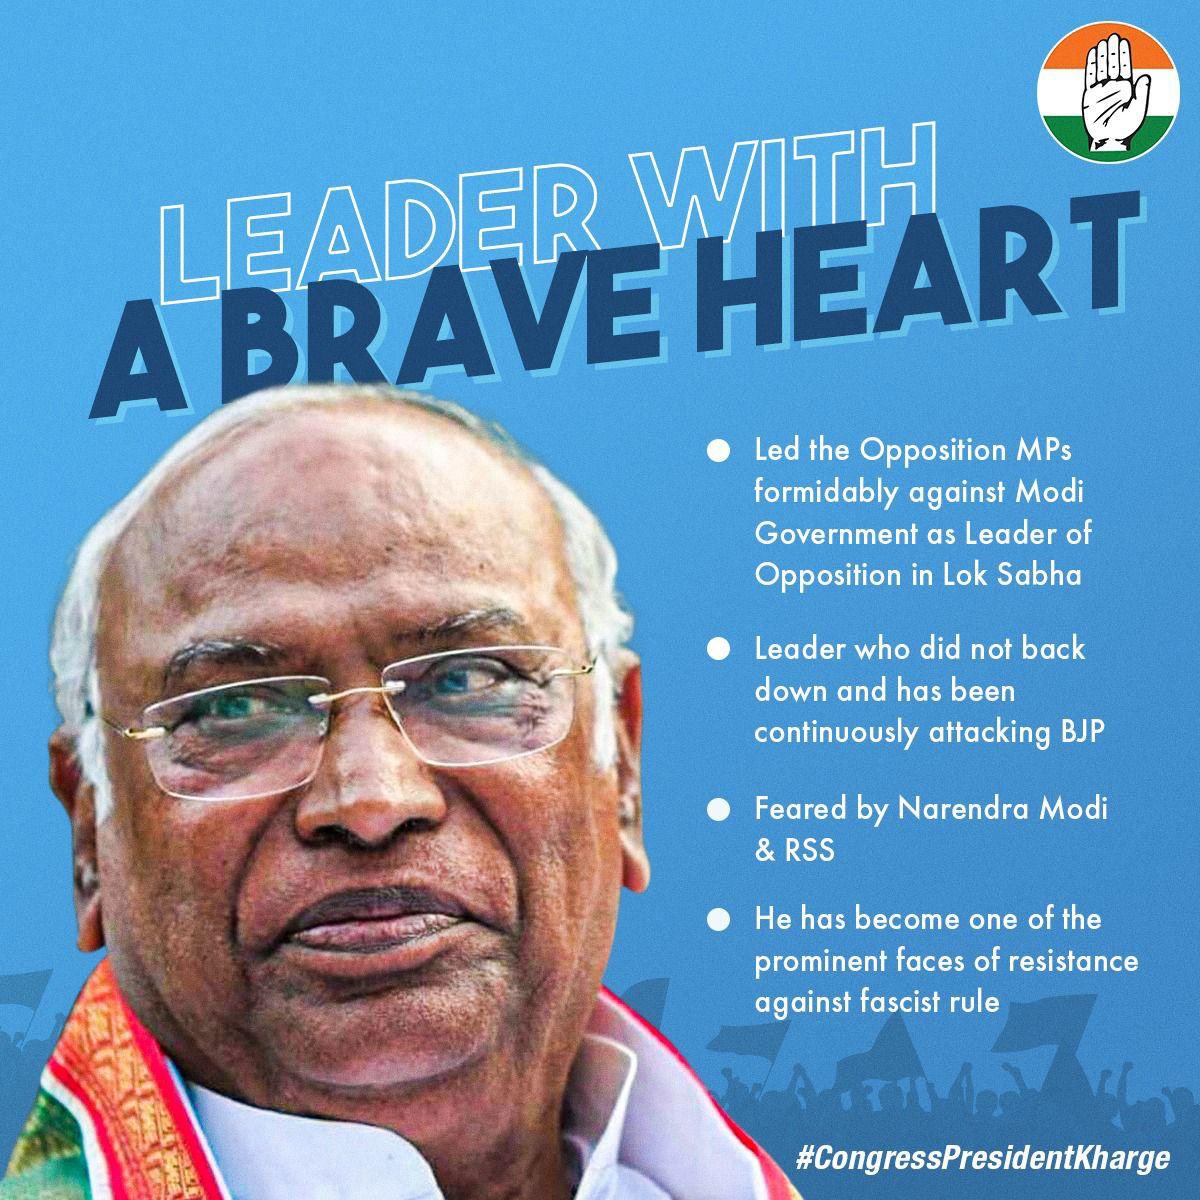 #CongressPresidentKharge 

A courageous leader who is fighting RSS BJP agenda even at the age of 80 is an inspiration to every Congressis like us

More power to you Sir